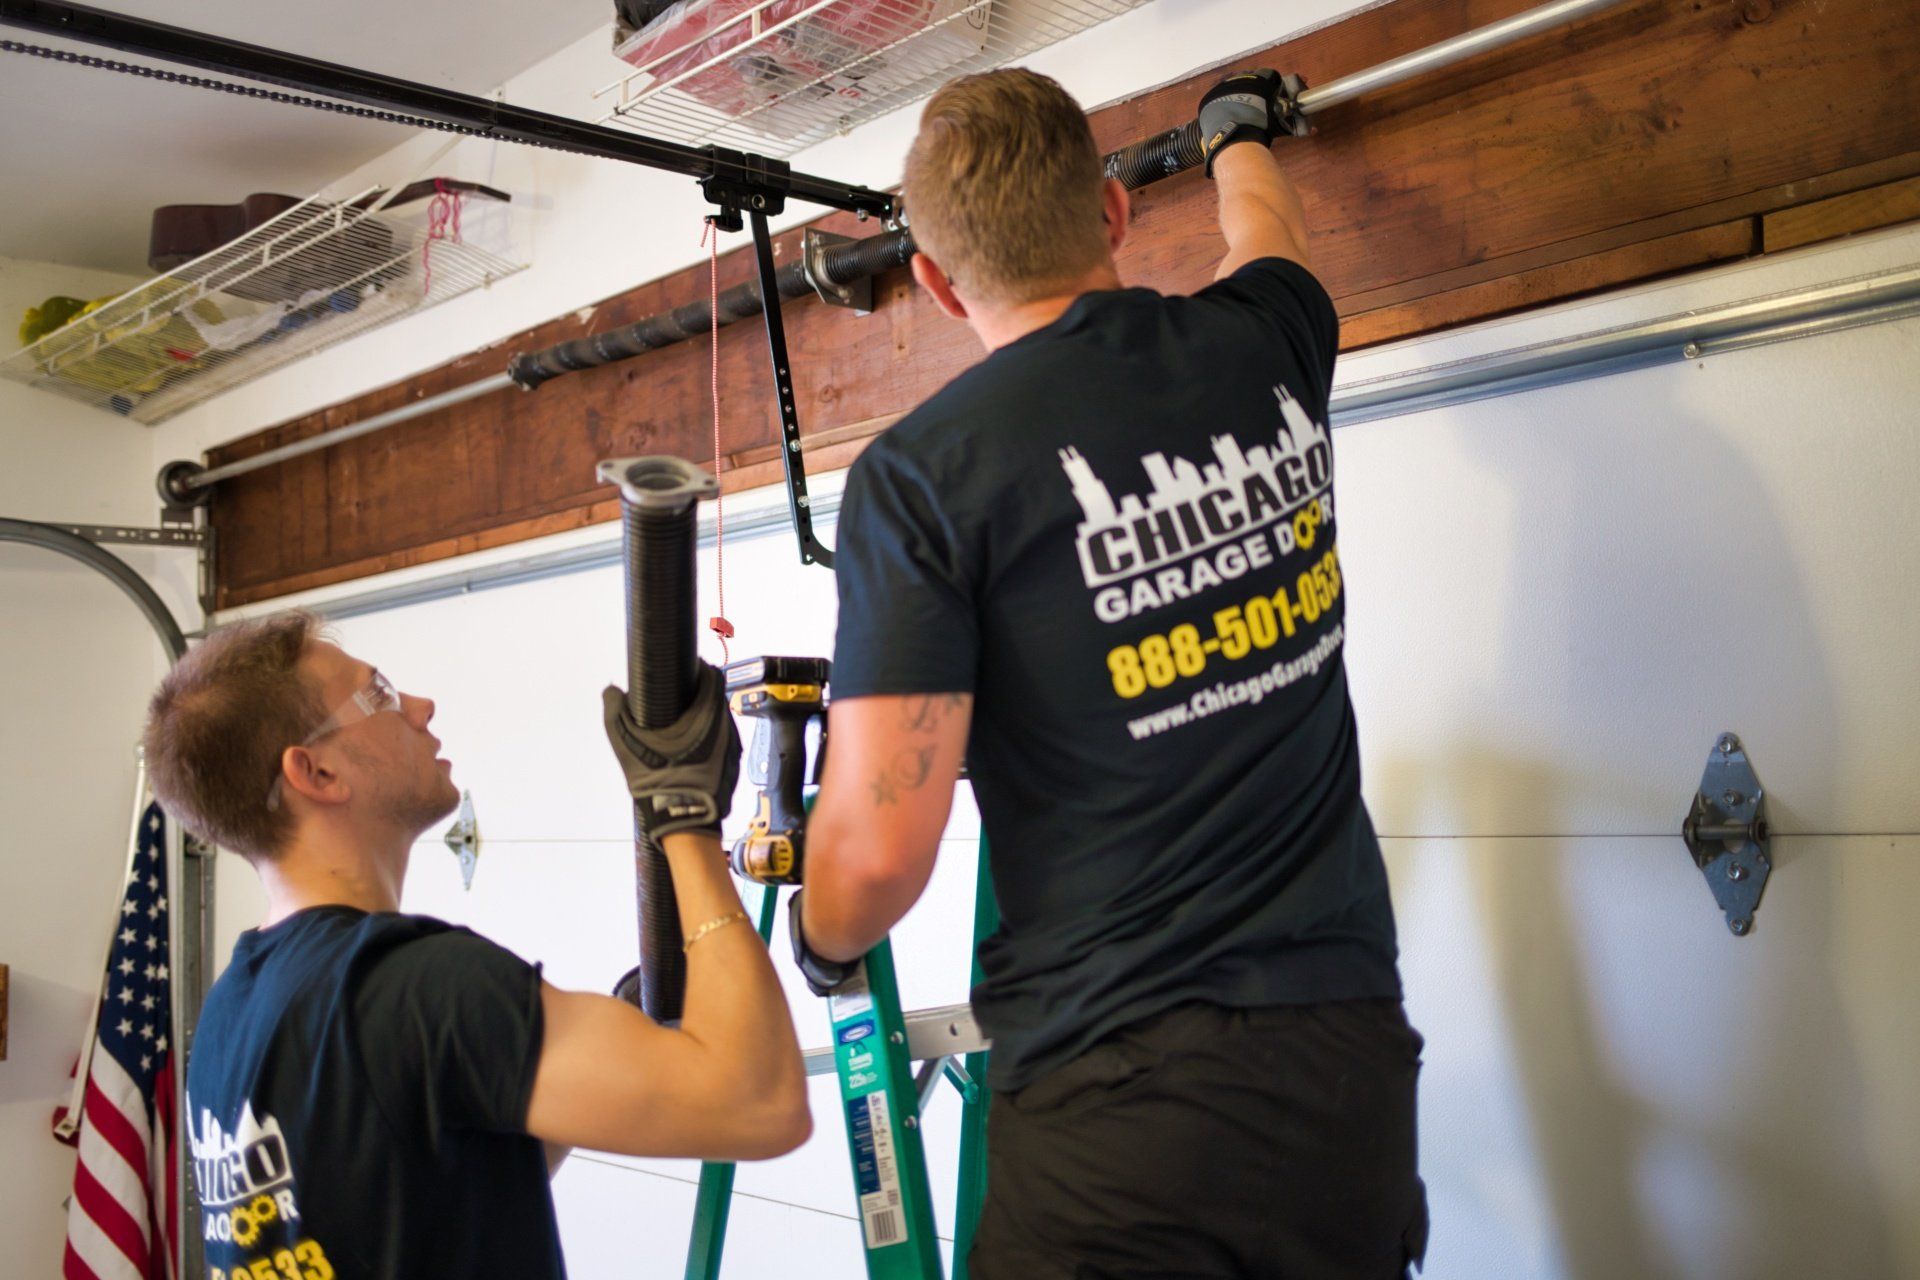 Excellent garage door repair service in Highland Park, IL and all the surrounding areas